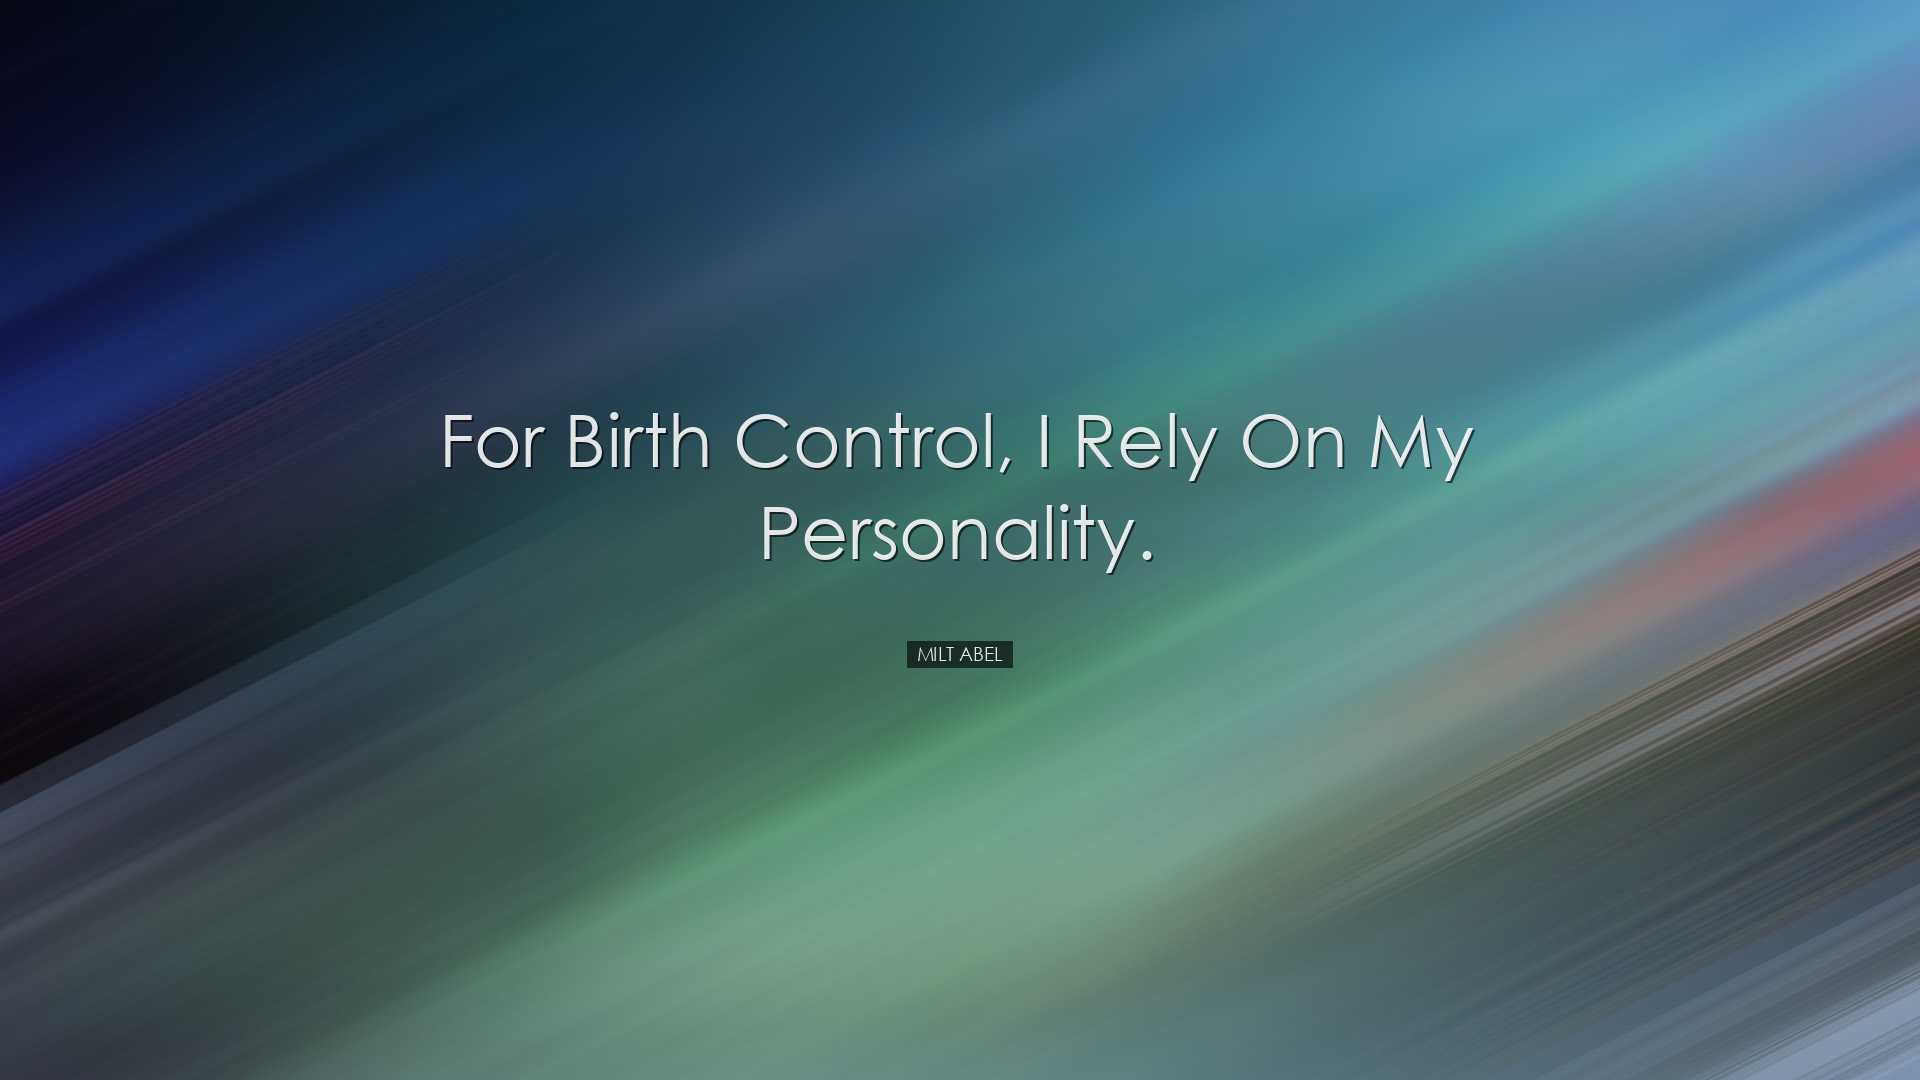 For birth control, I rely on my personality. - Milt Abel